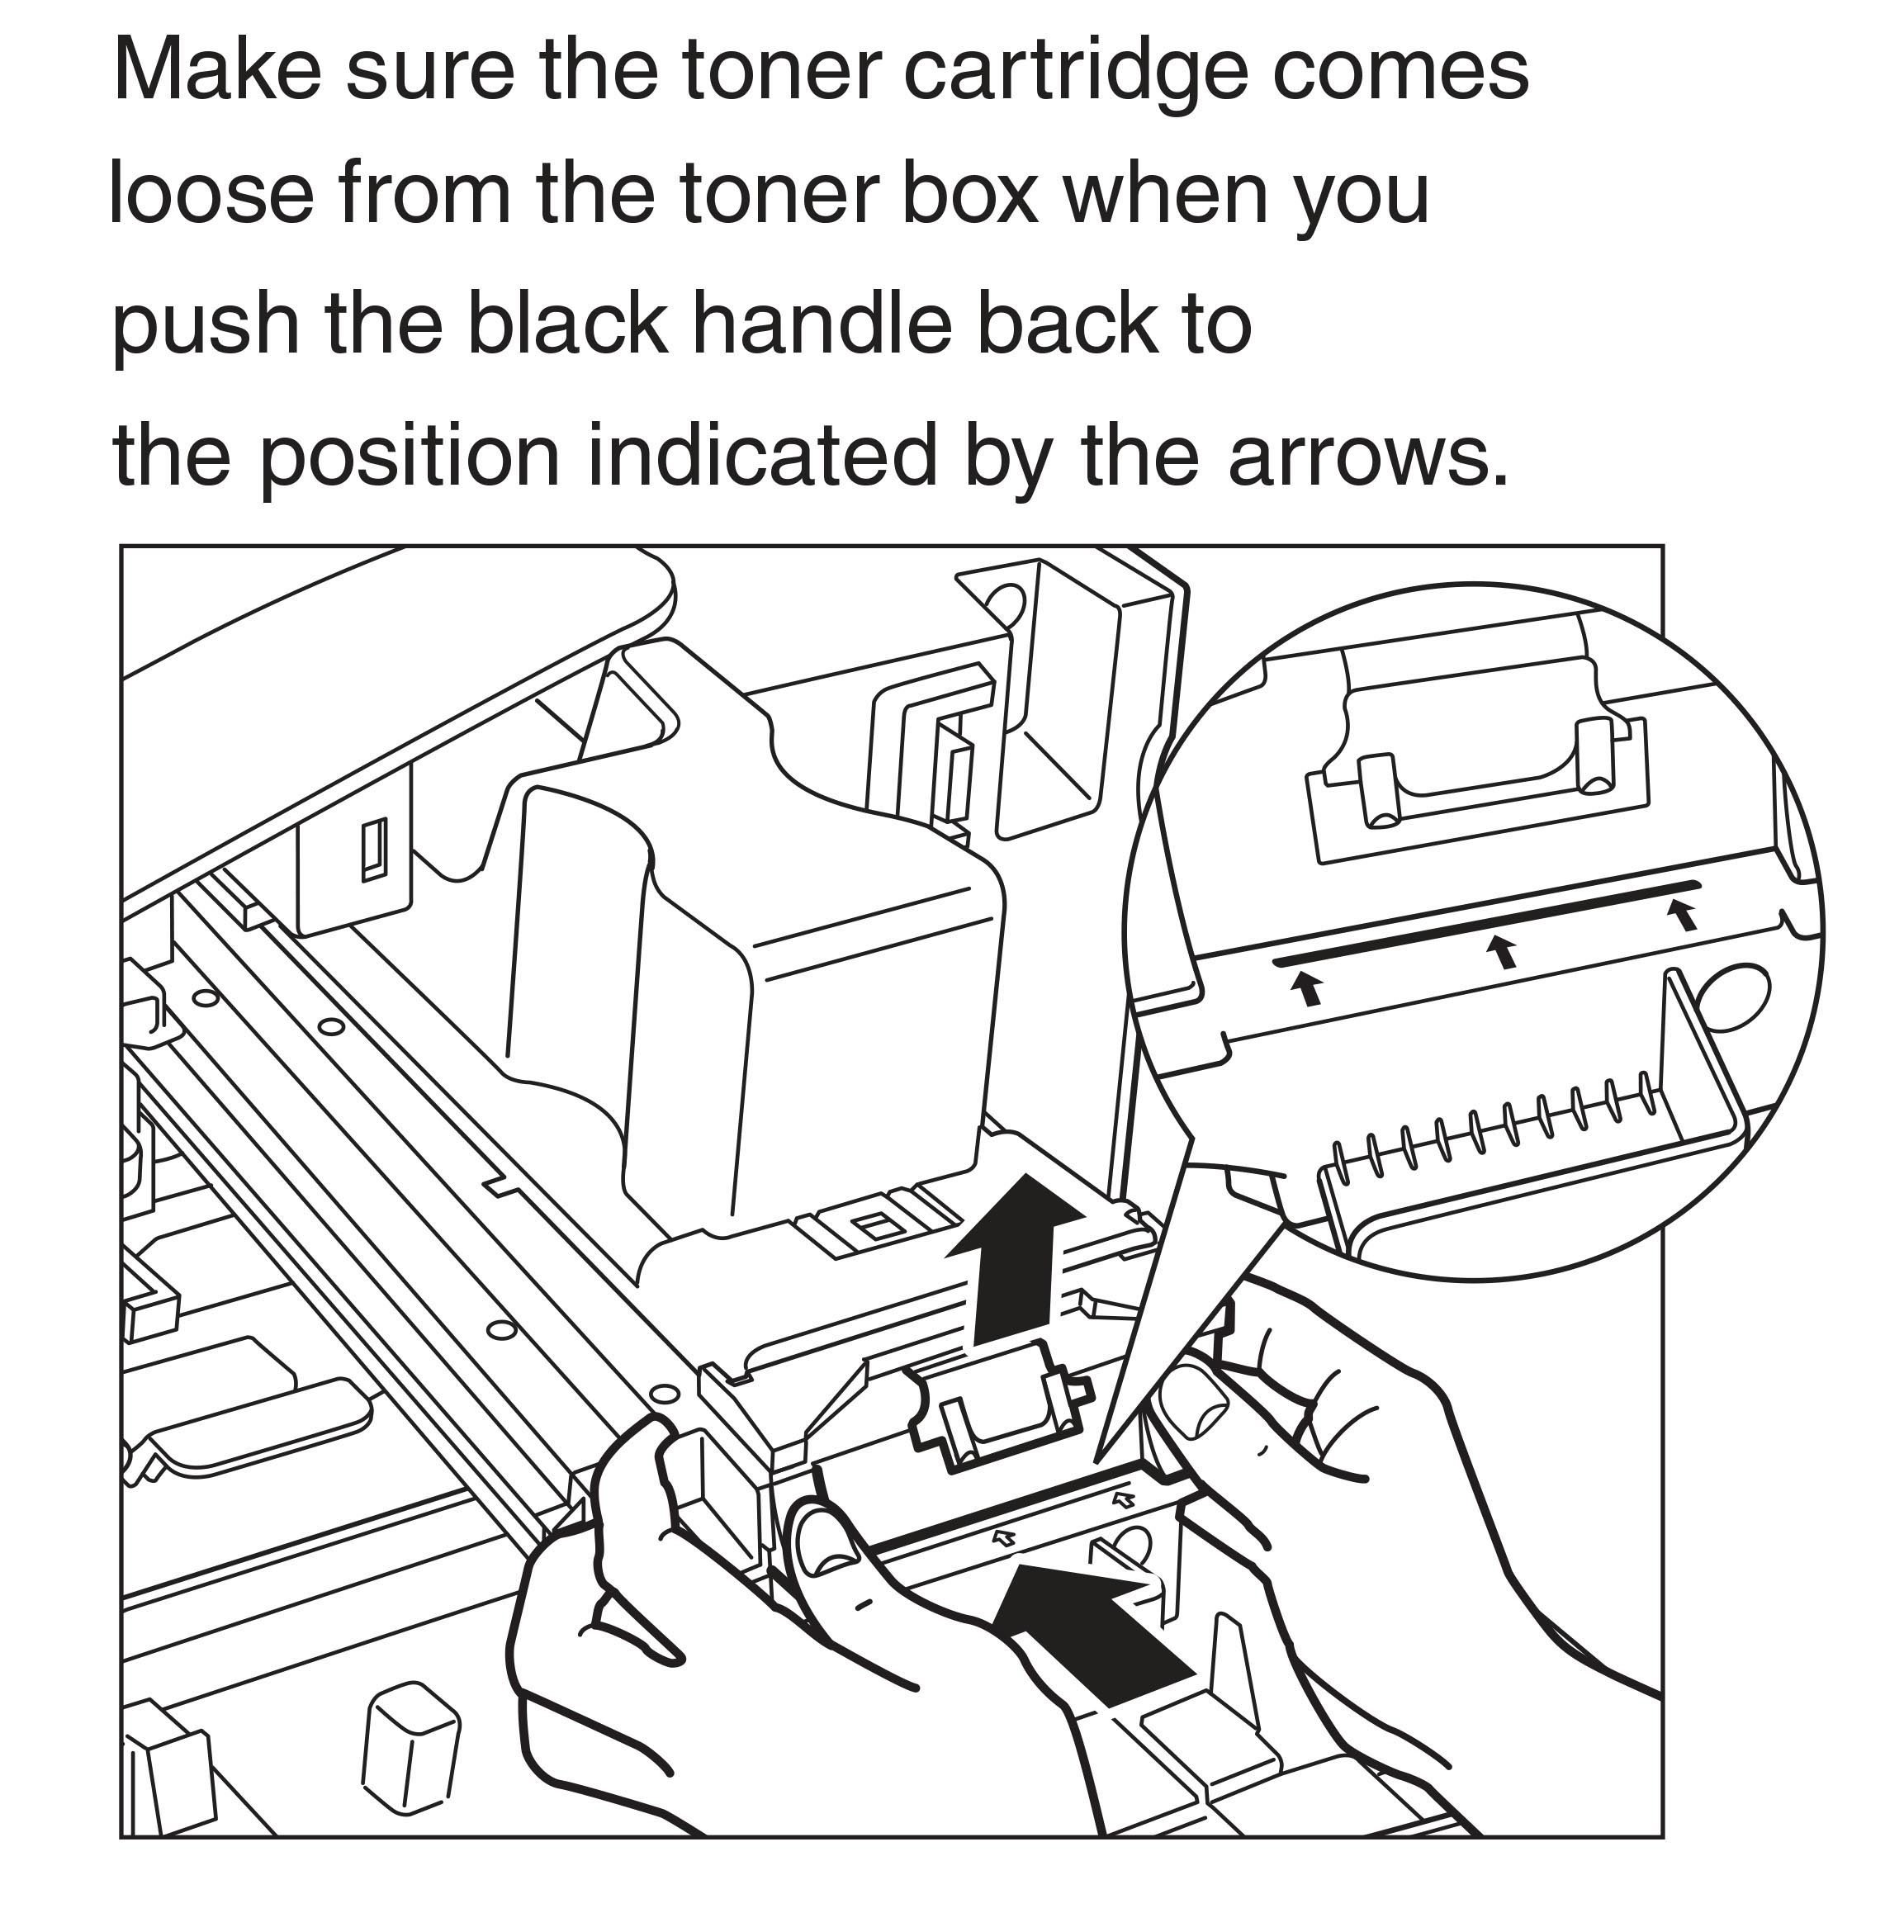 Make sure the toner cartidge comes loose from the toner box when you push the black handle back to the position indicated by the arrows.